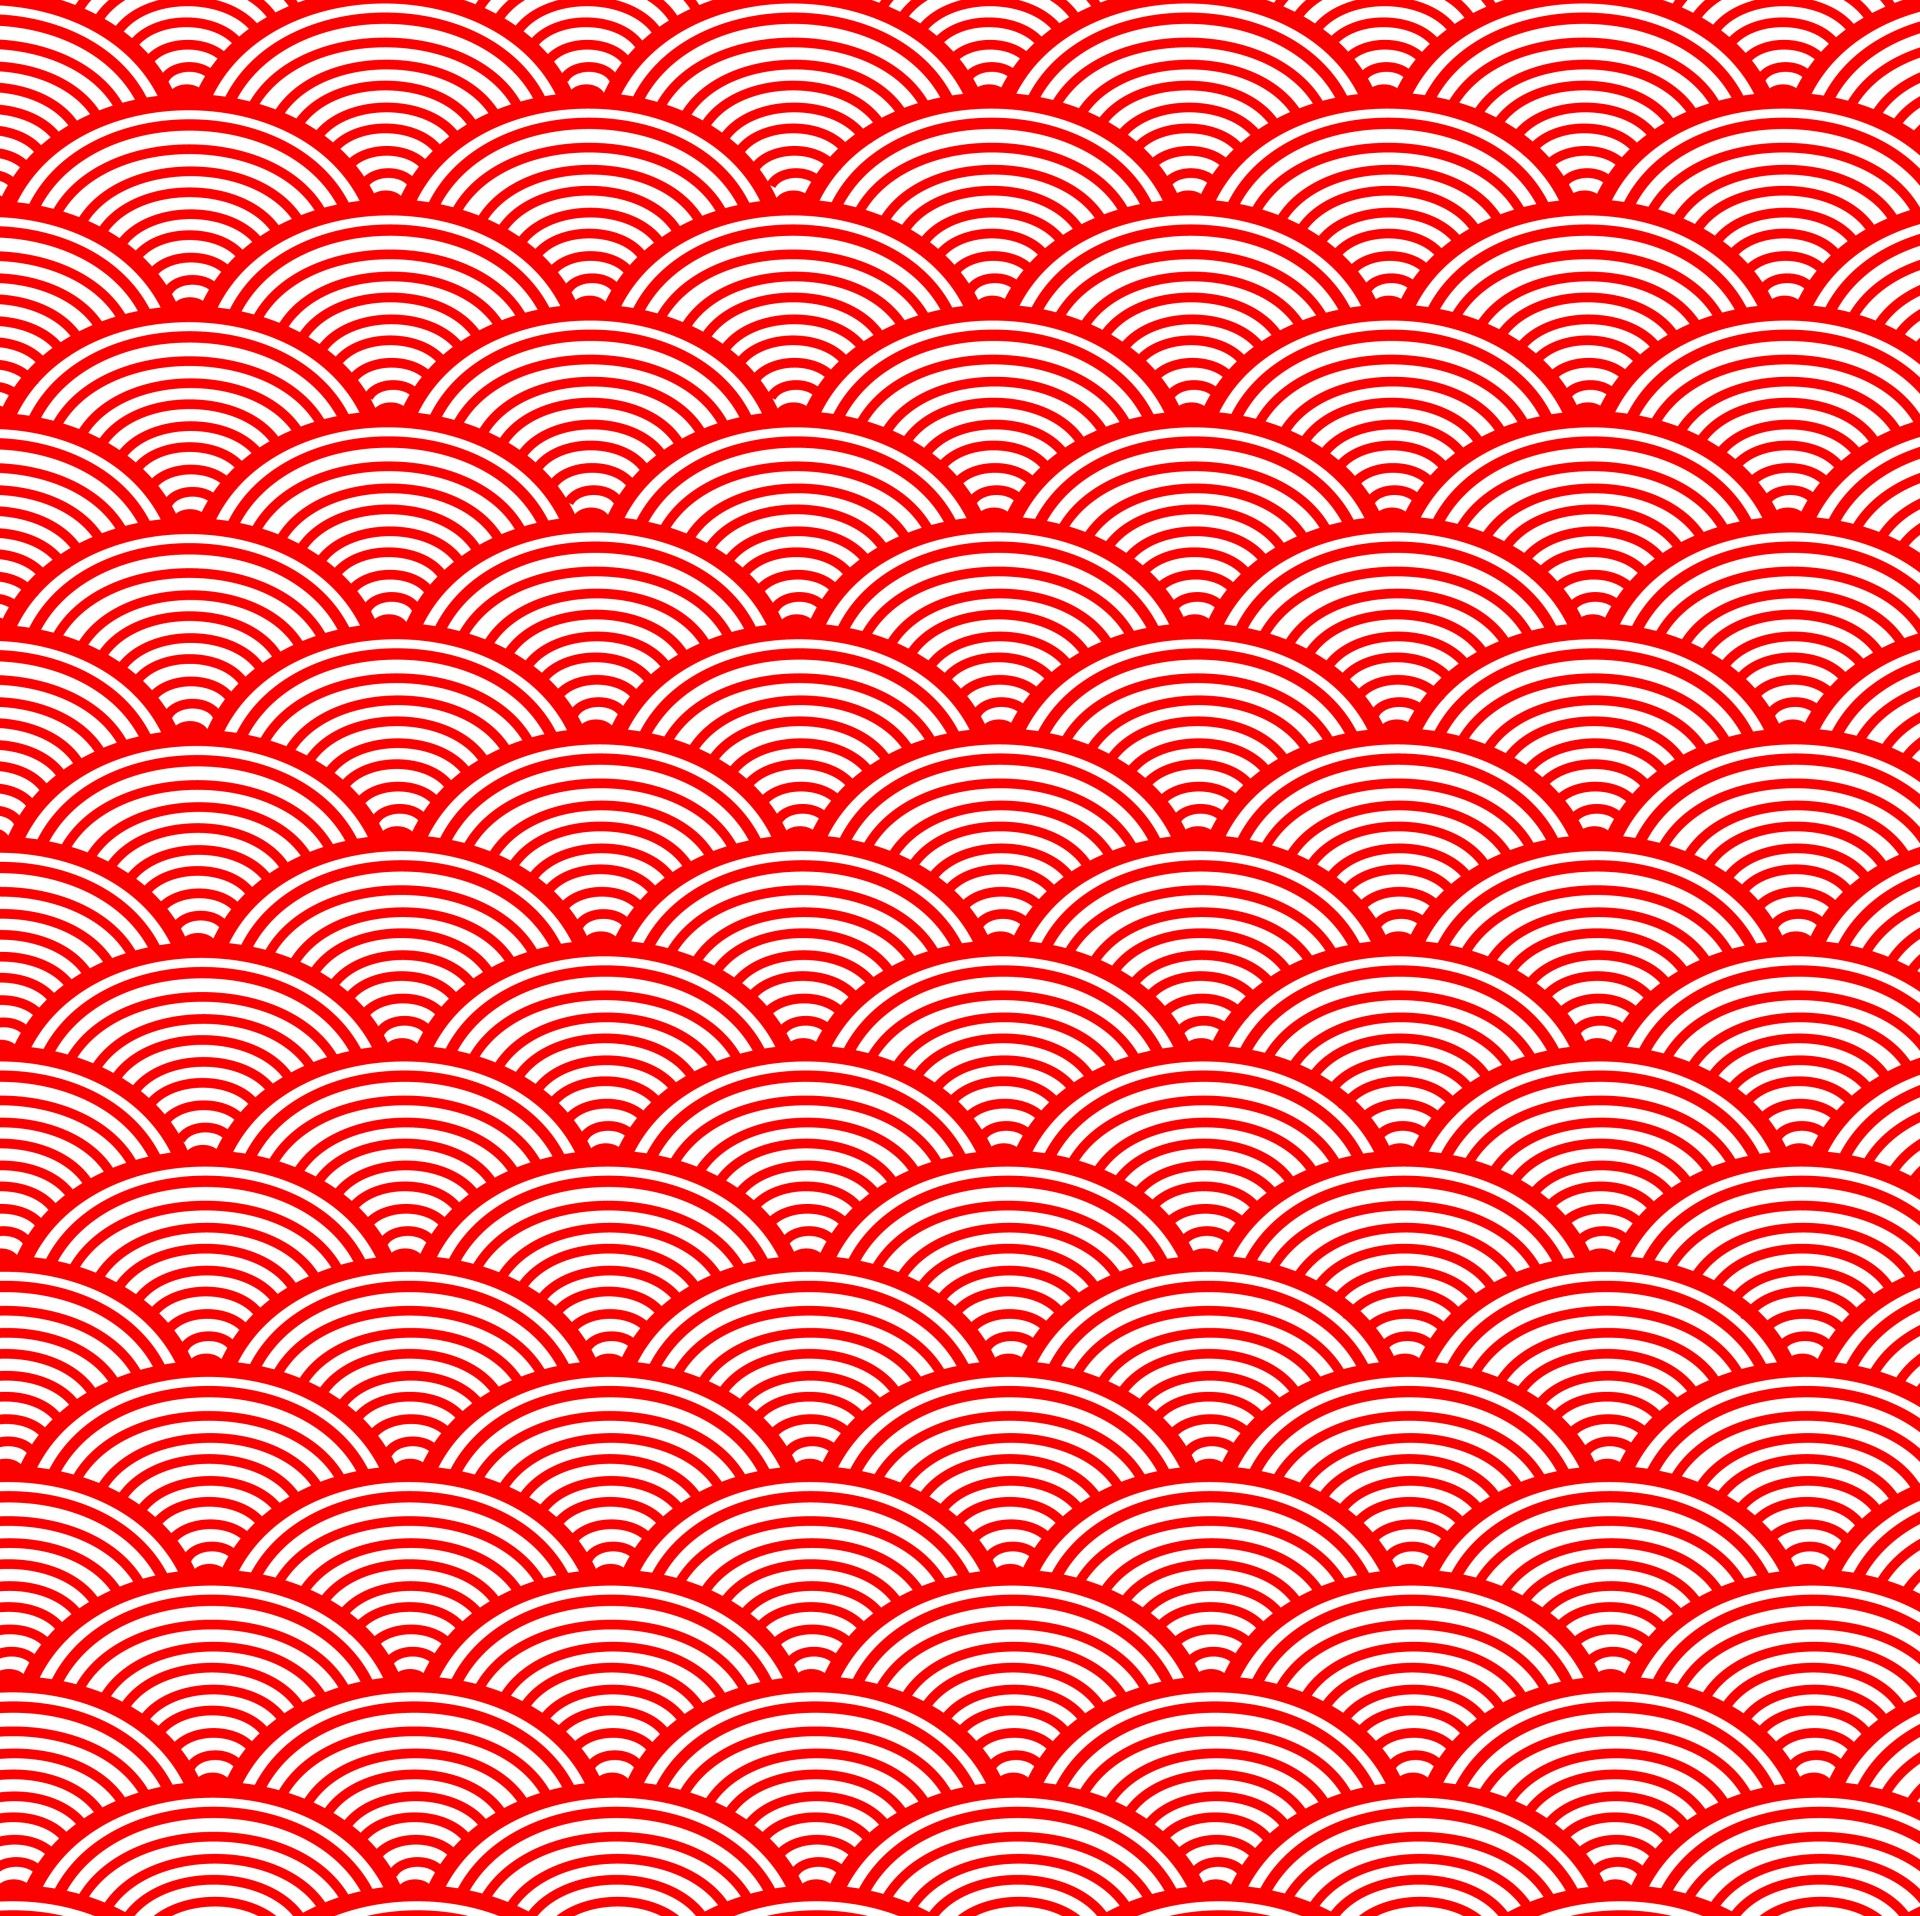 Japanese Wave Wallpaper Background. AAPIs in 2019